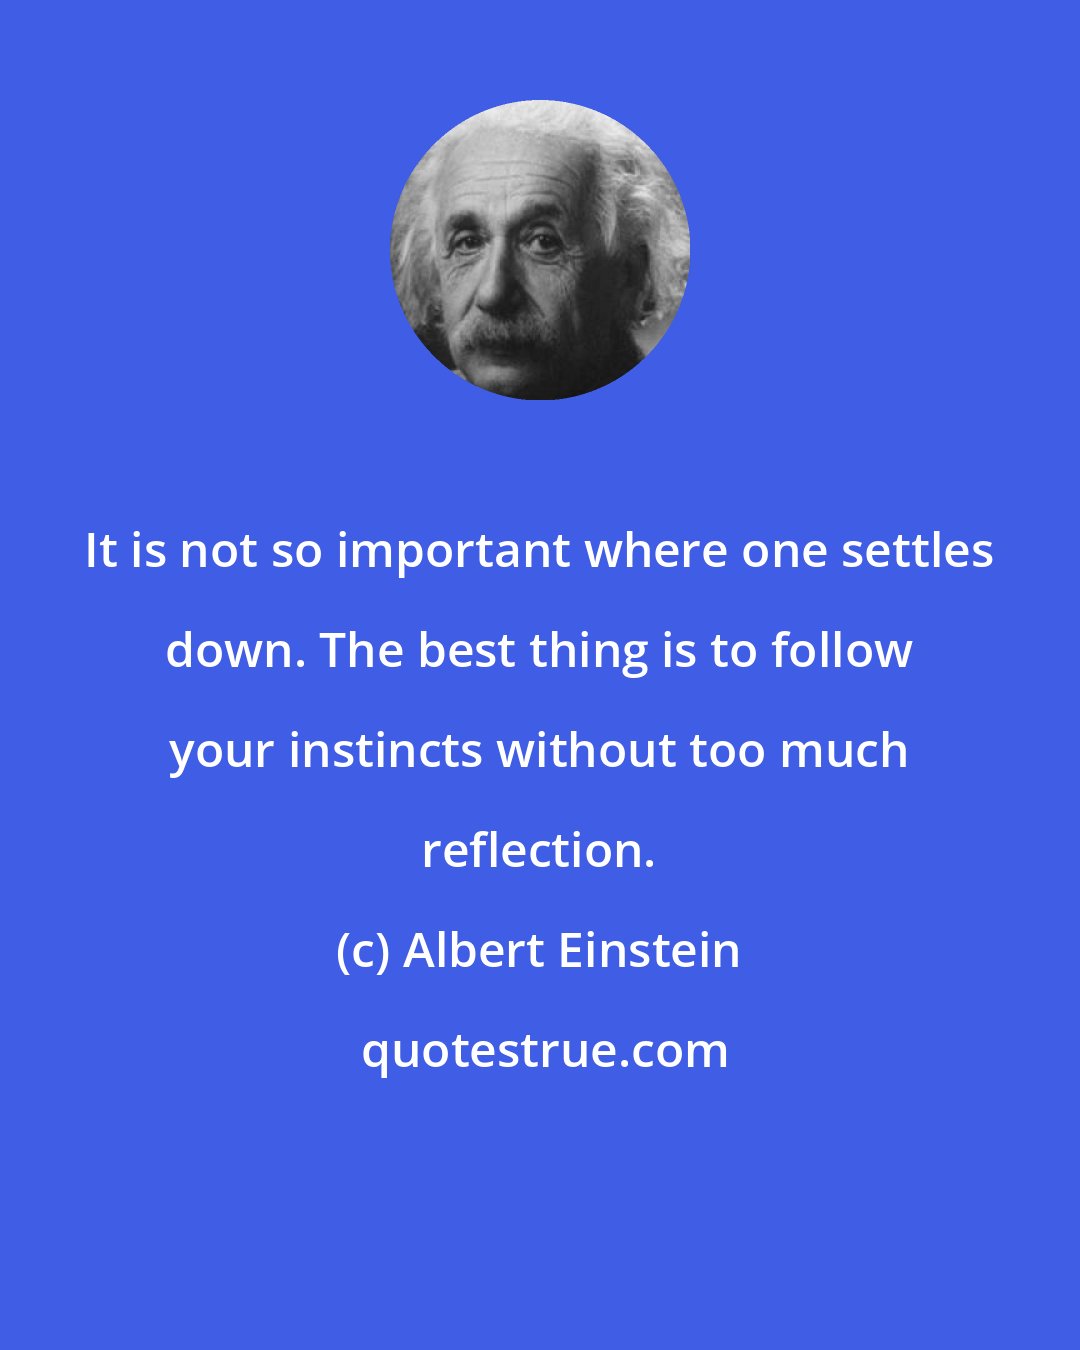 Albert Einstein: It is not so important where one settles down. The best thing is to follow your instincts without too much reflection.